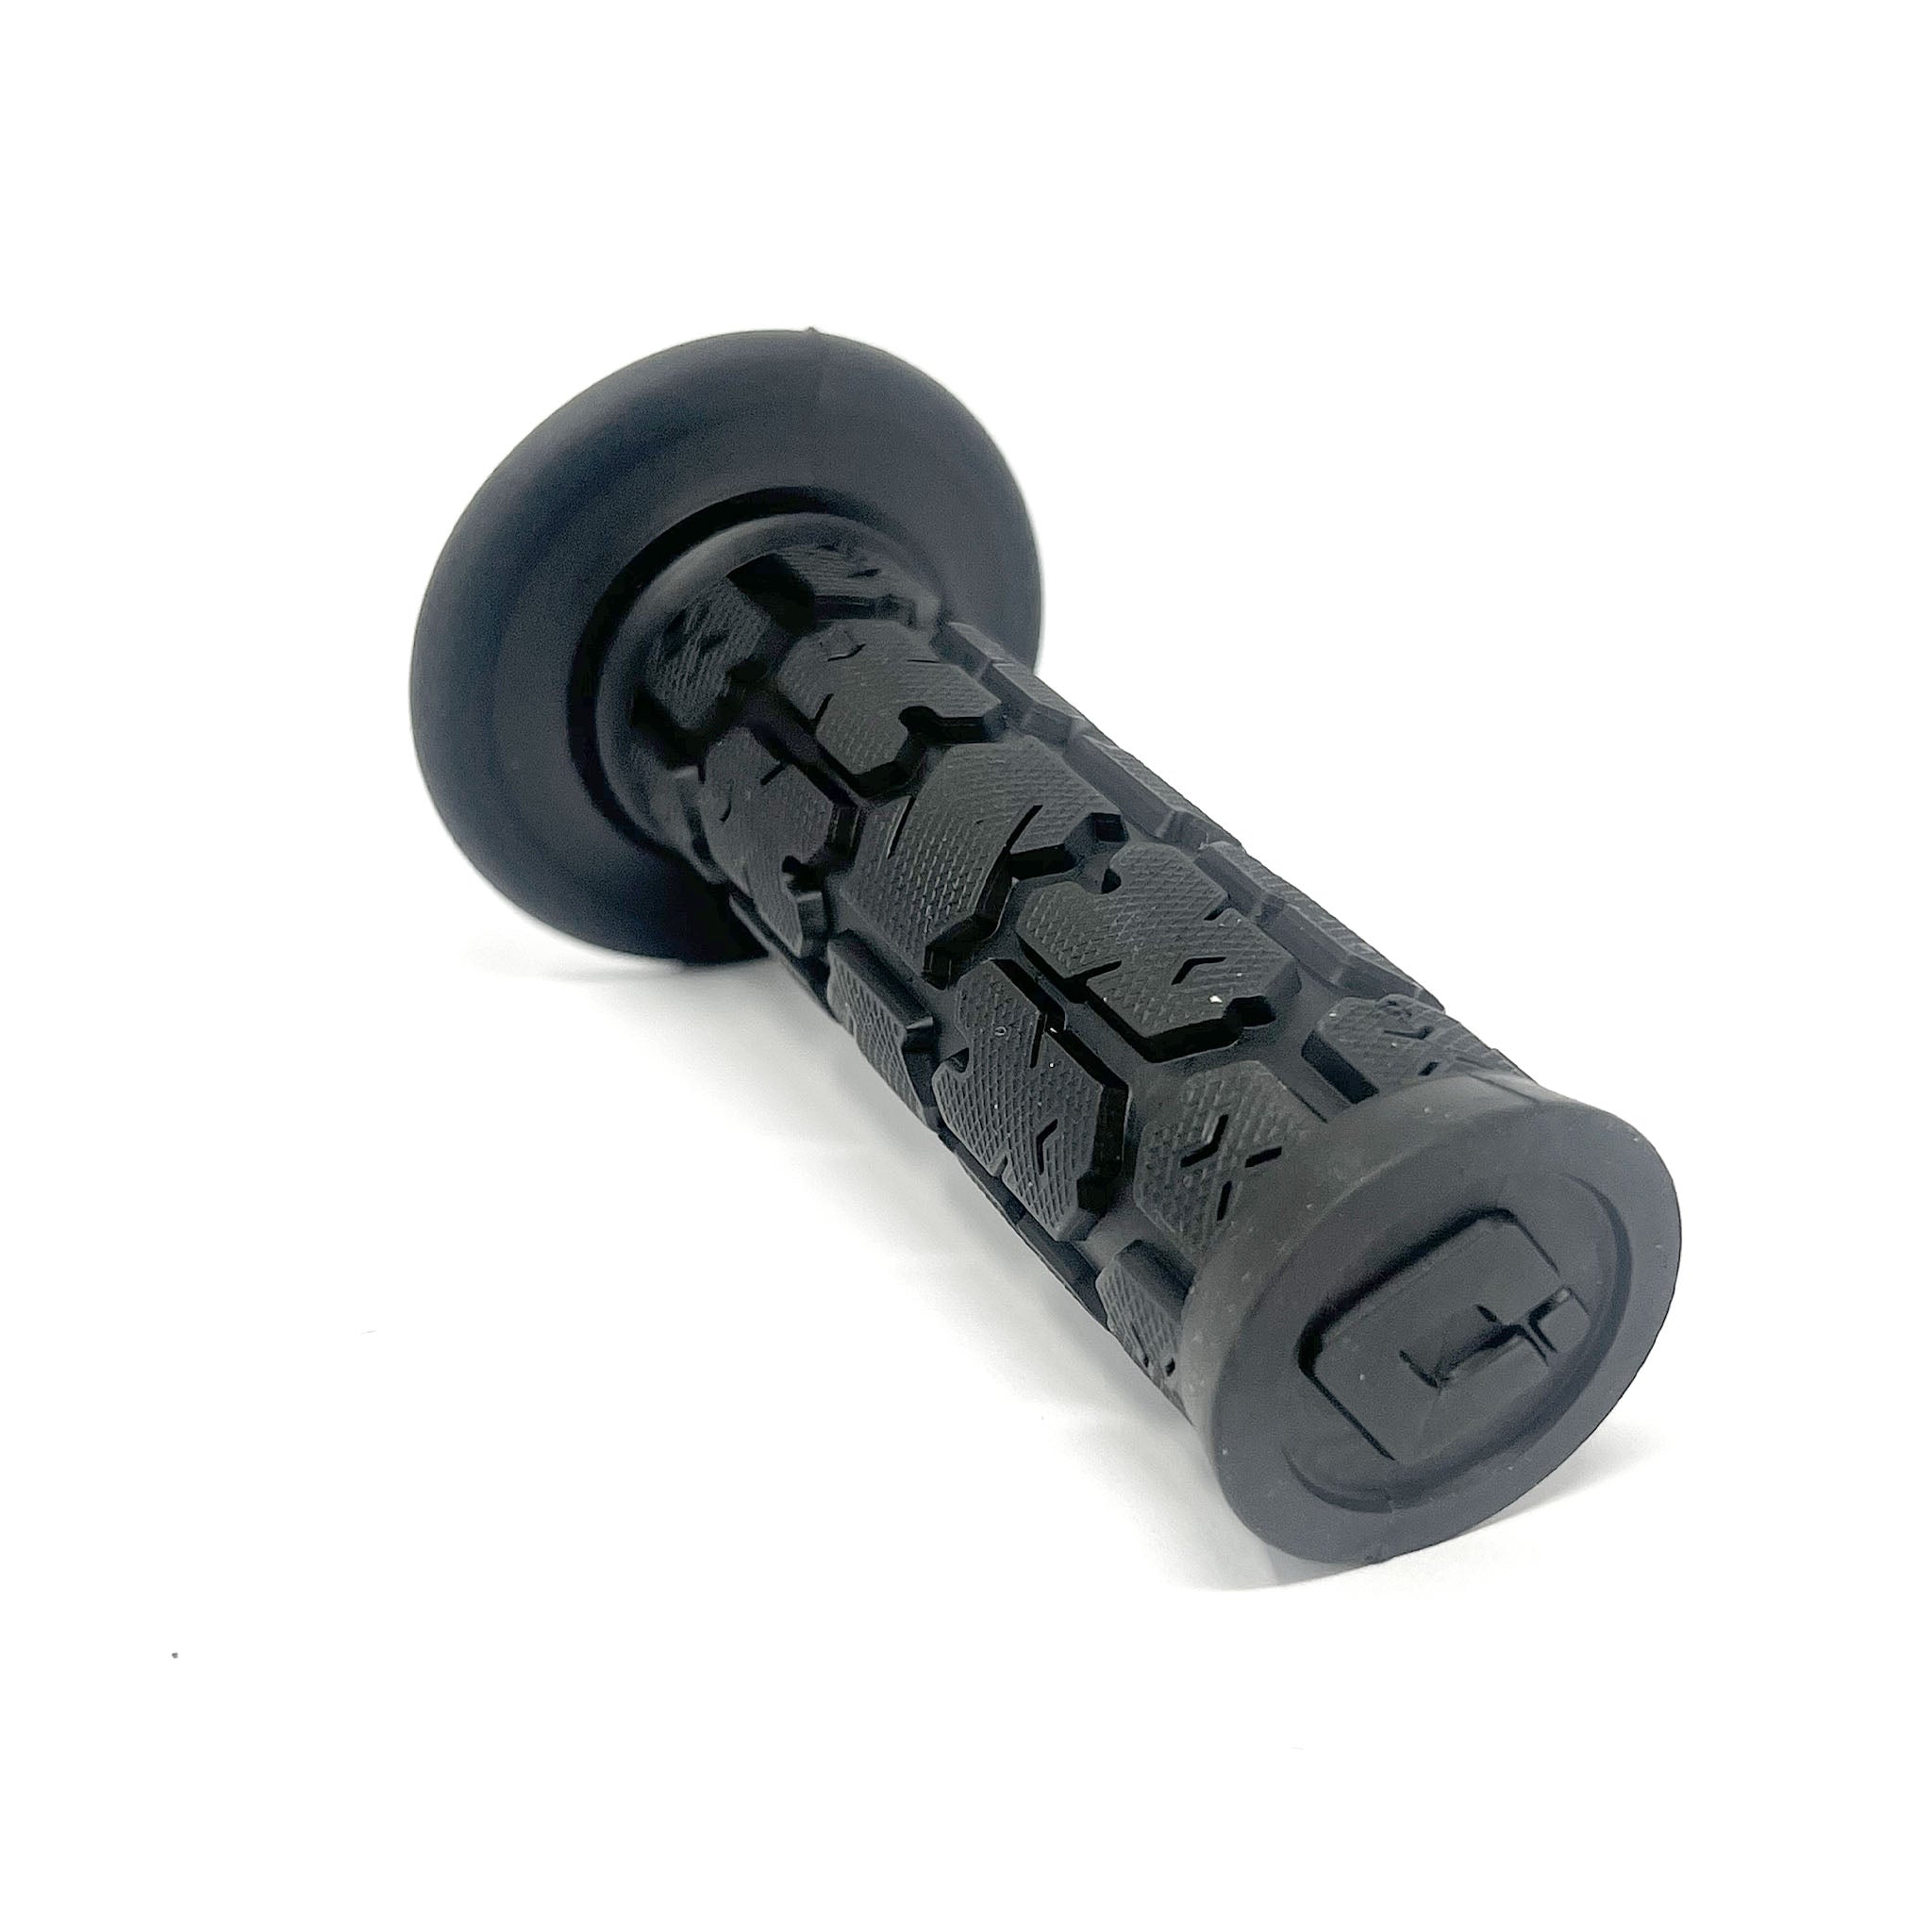 Black Rubber Grip For Bead Lifting Tools